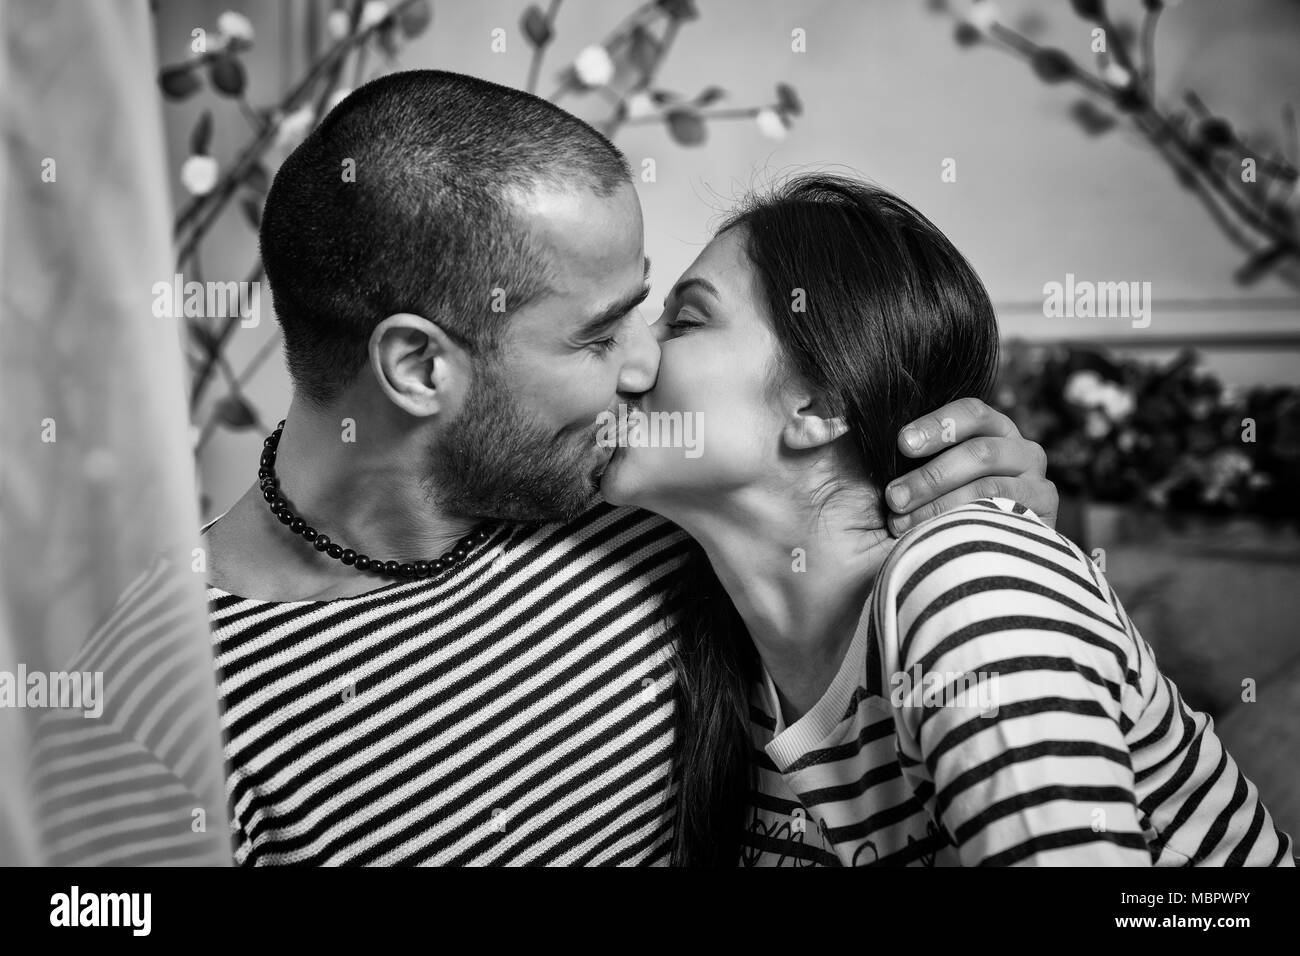 https://c8.alamy.com/comp/MBPWPY/black-and-white-photo-of-charming-international-couple-in-striped-sweaters-kissing-and-hugging-while-sitting-on-the-bed-in-the-bedroom-MBPWPY.jpg